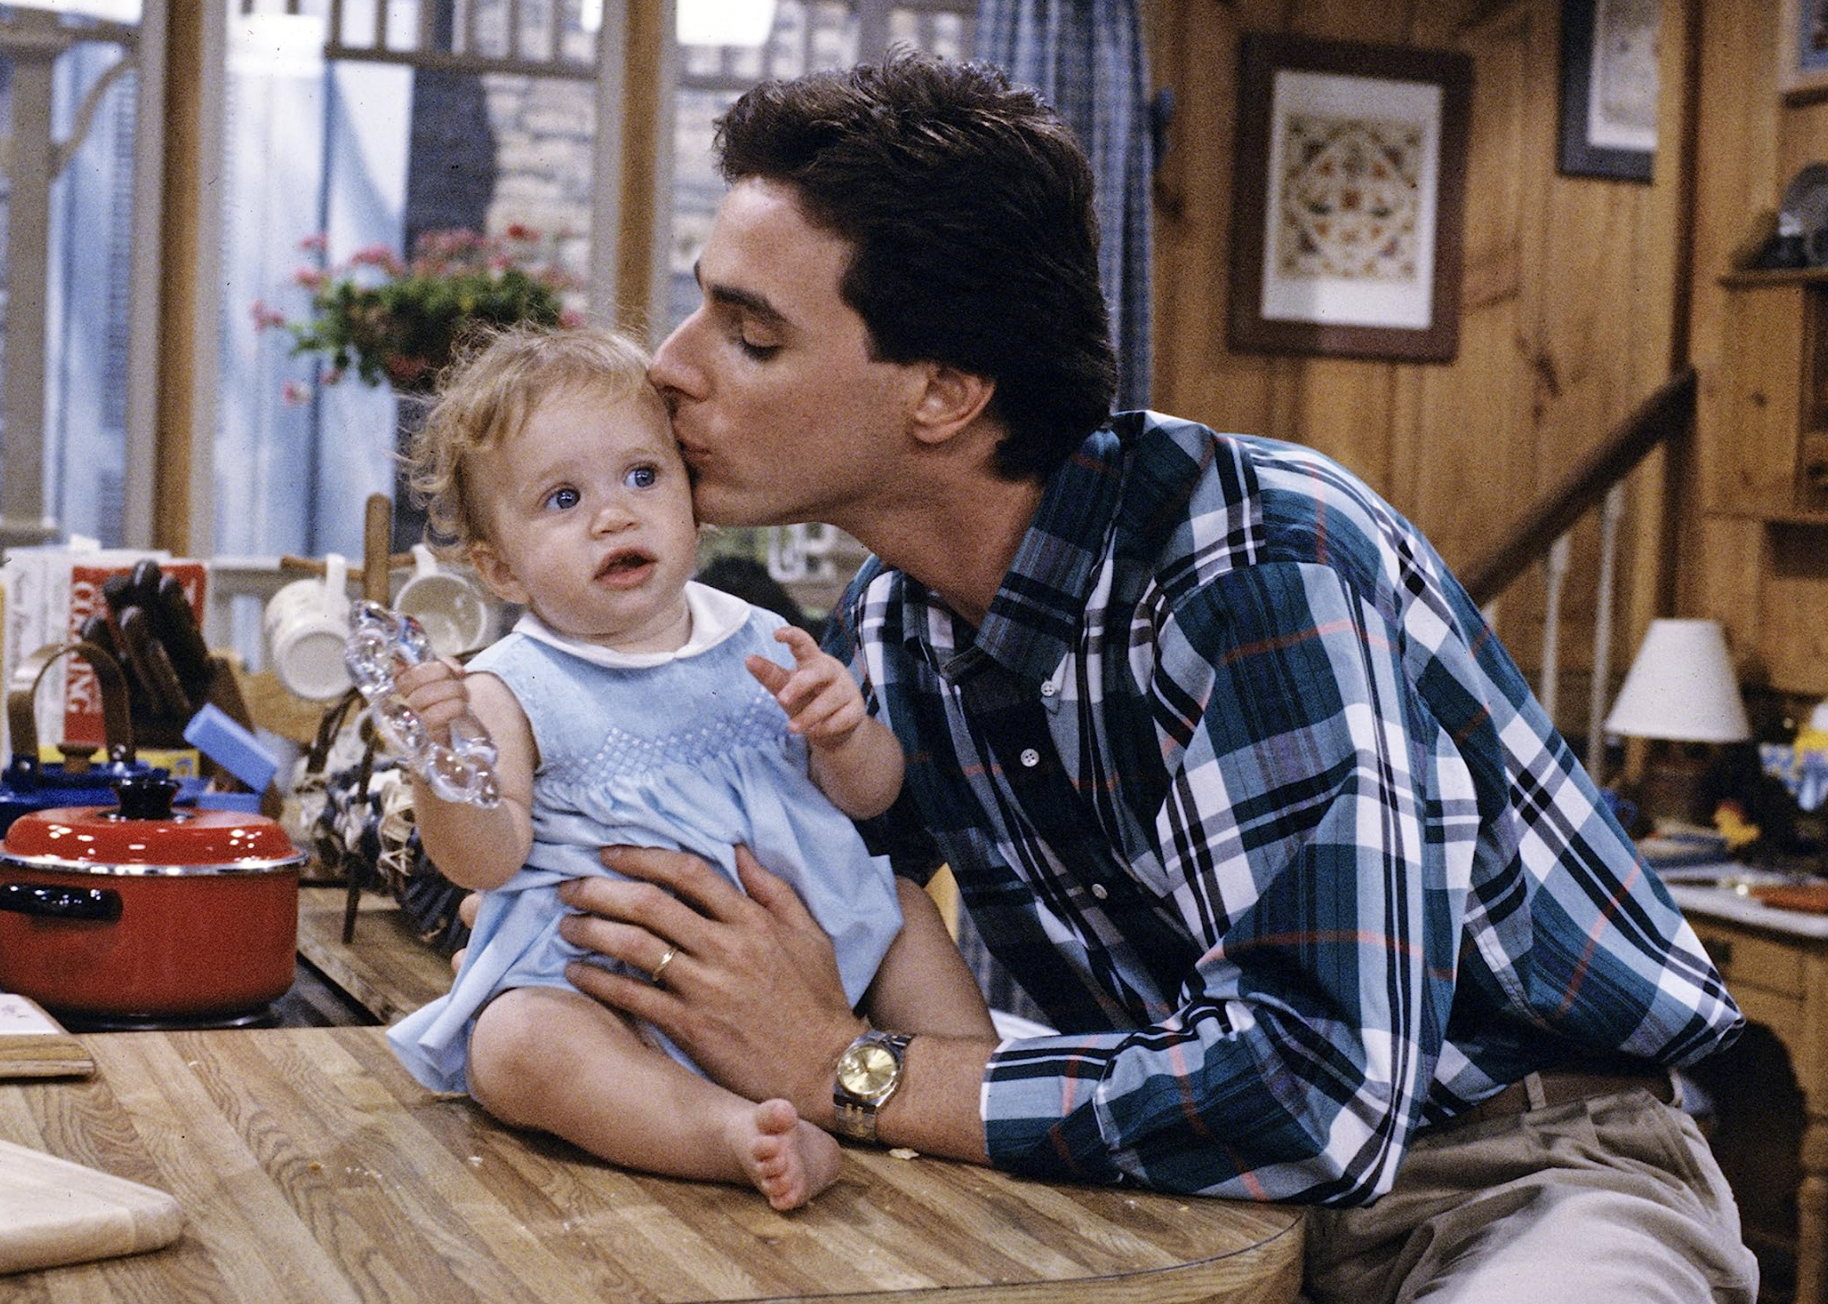 Mary-Kate Olsen and Bob Saget in a scene from "Full House".